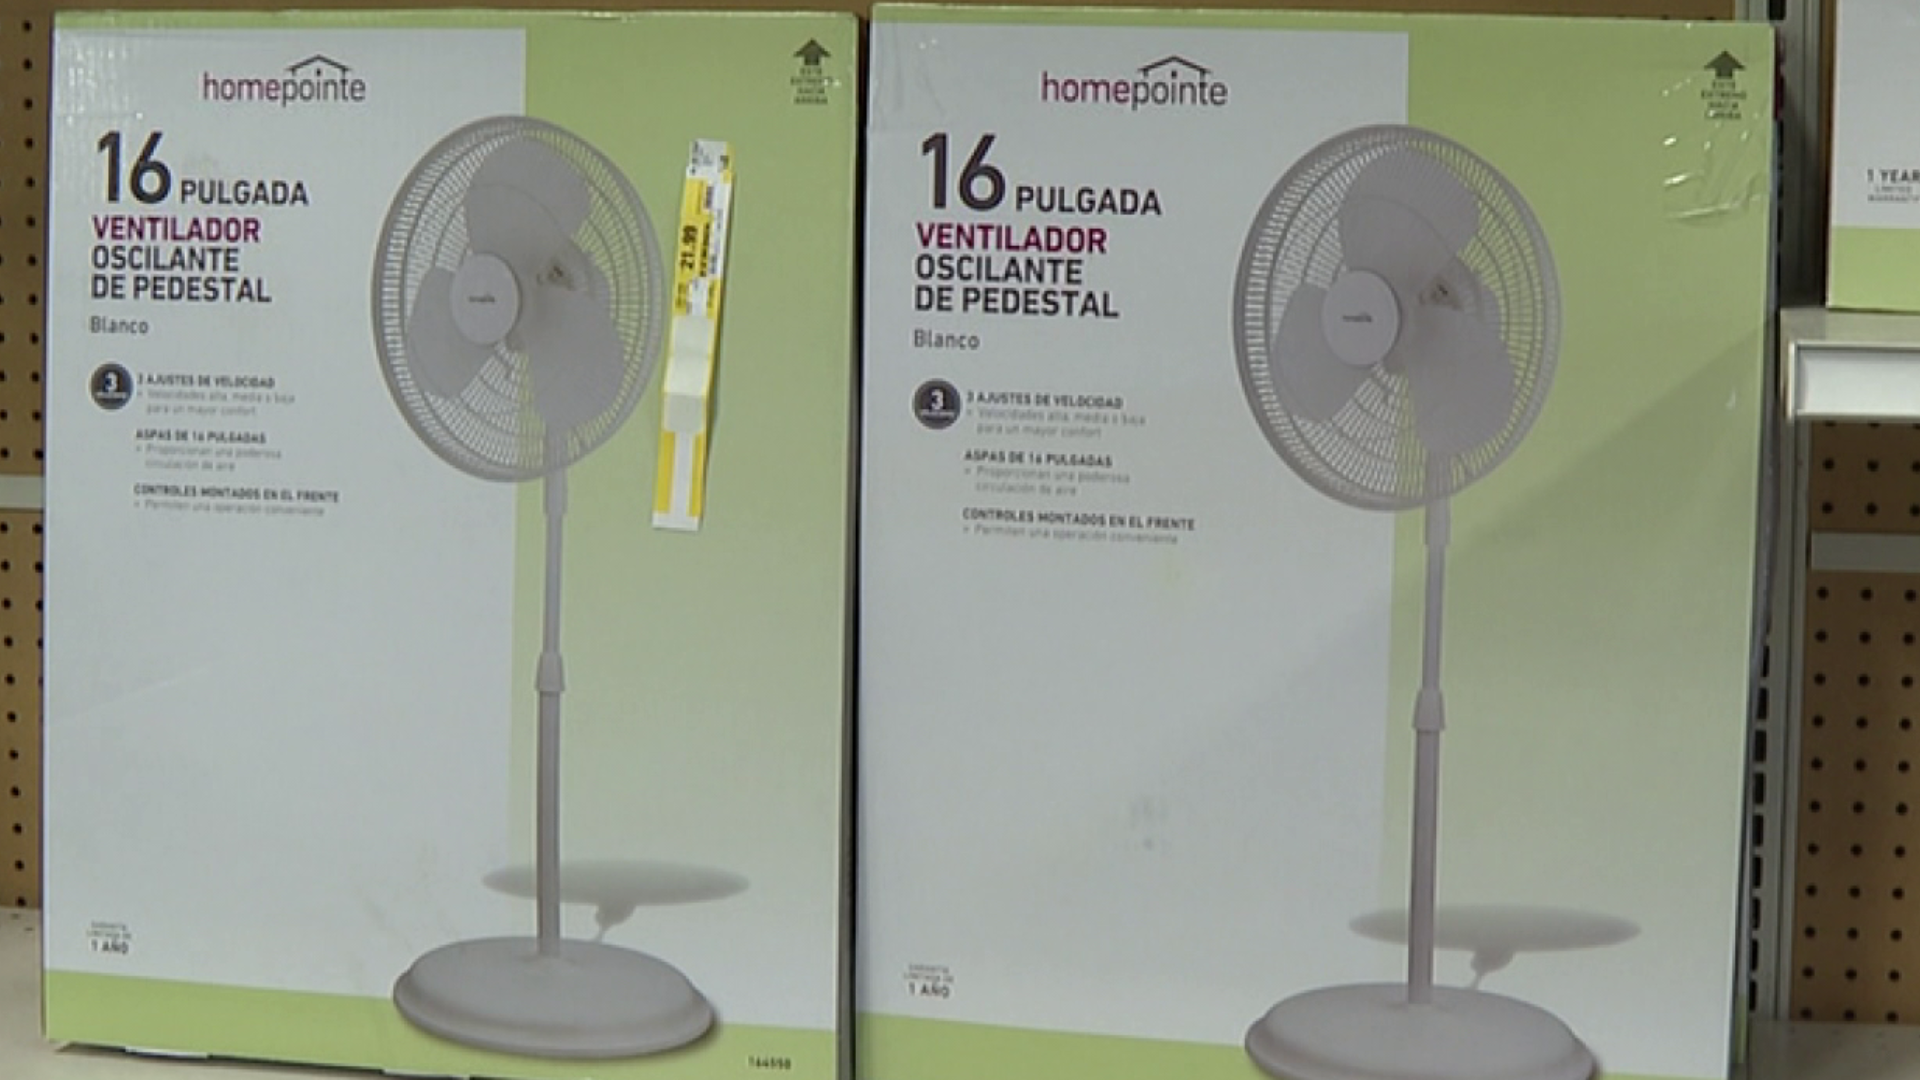 The air isn't the only thing hot right now air conditioners and fans are in high demand as people across our area try to outlast this heatwave.